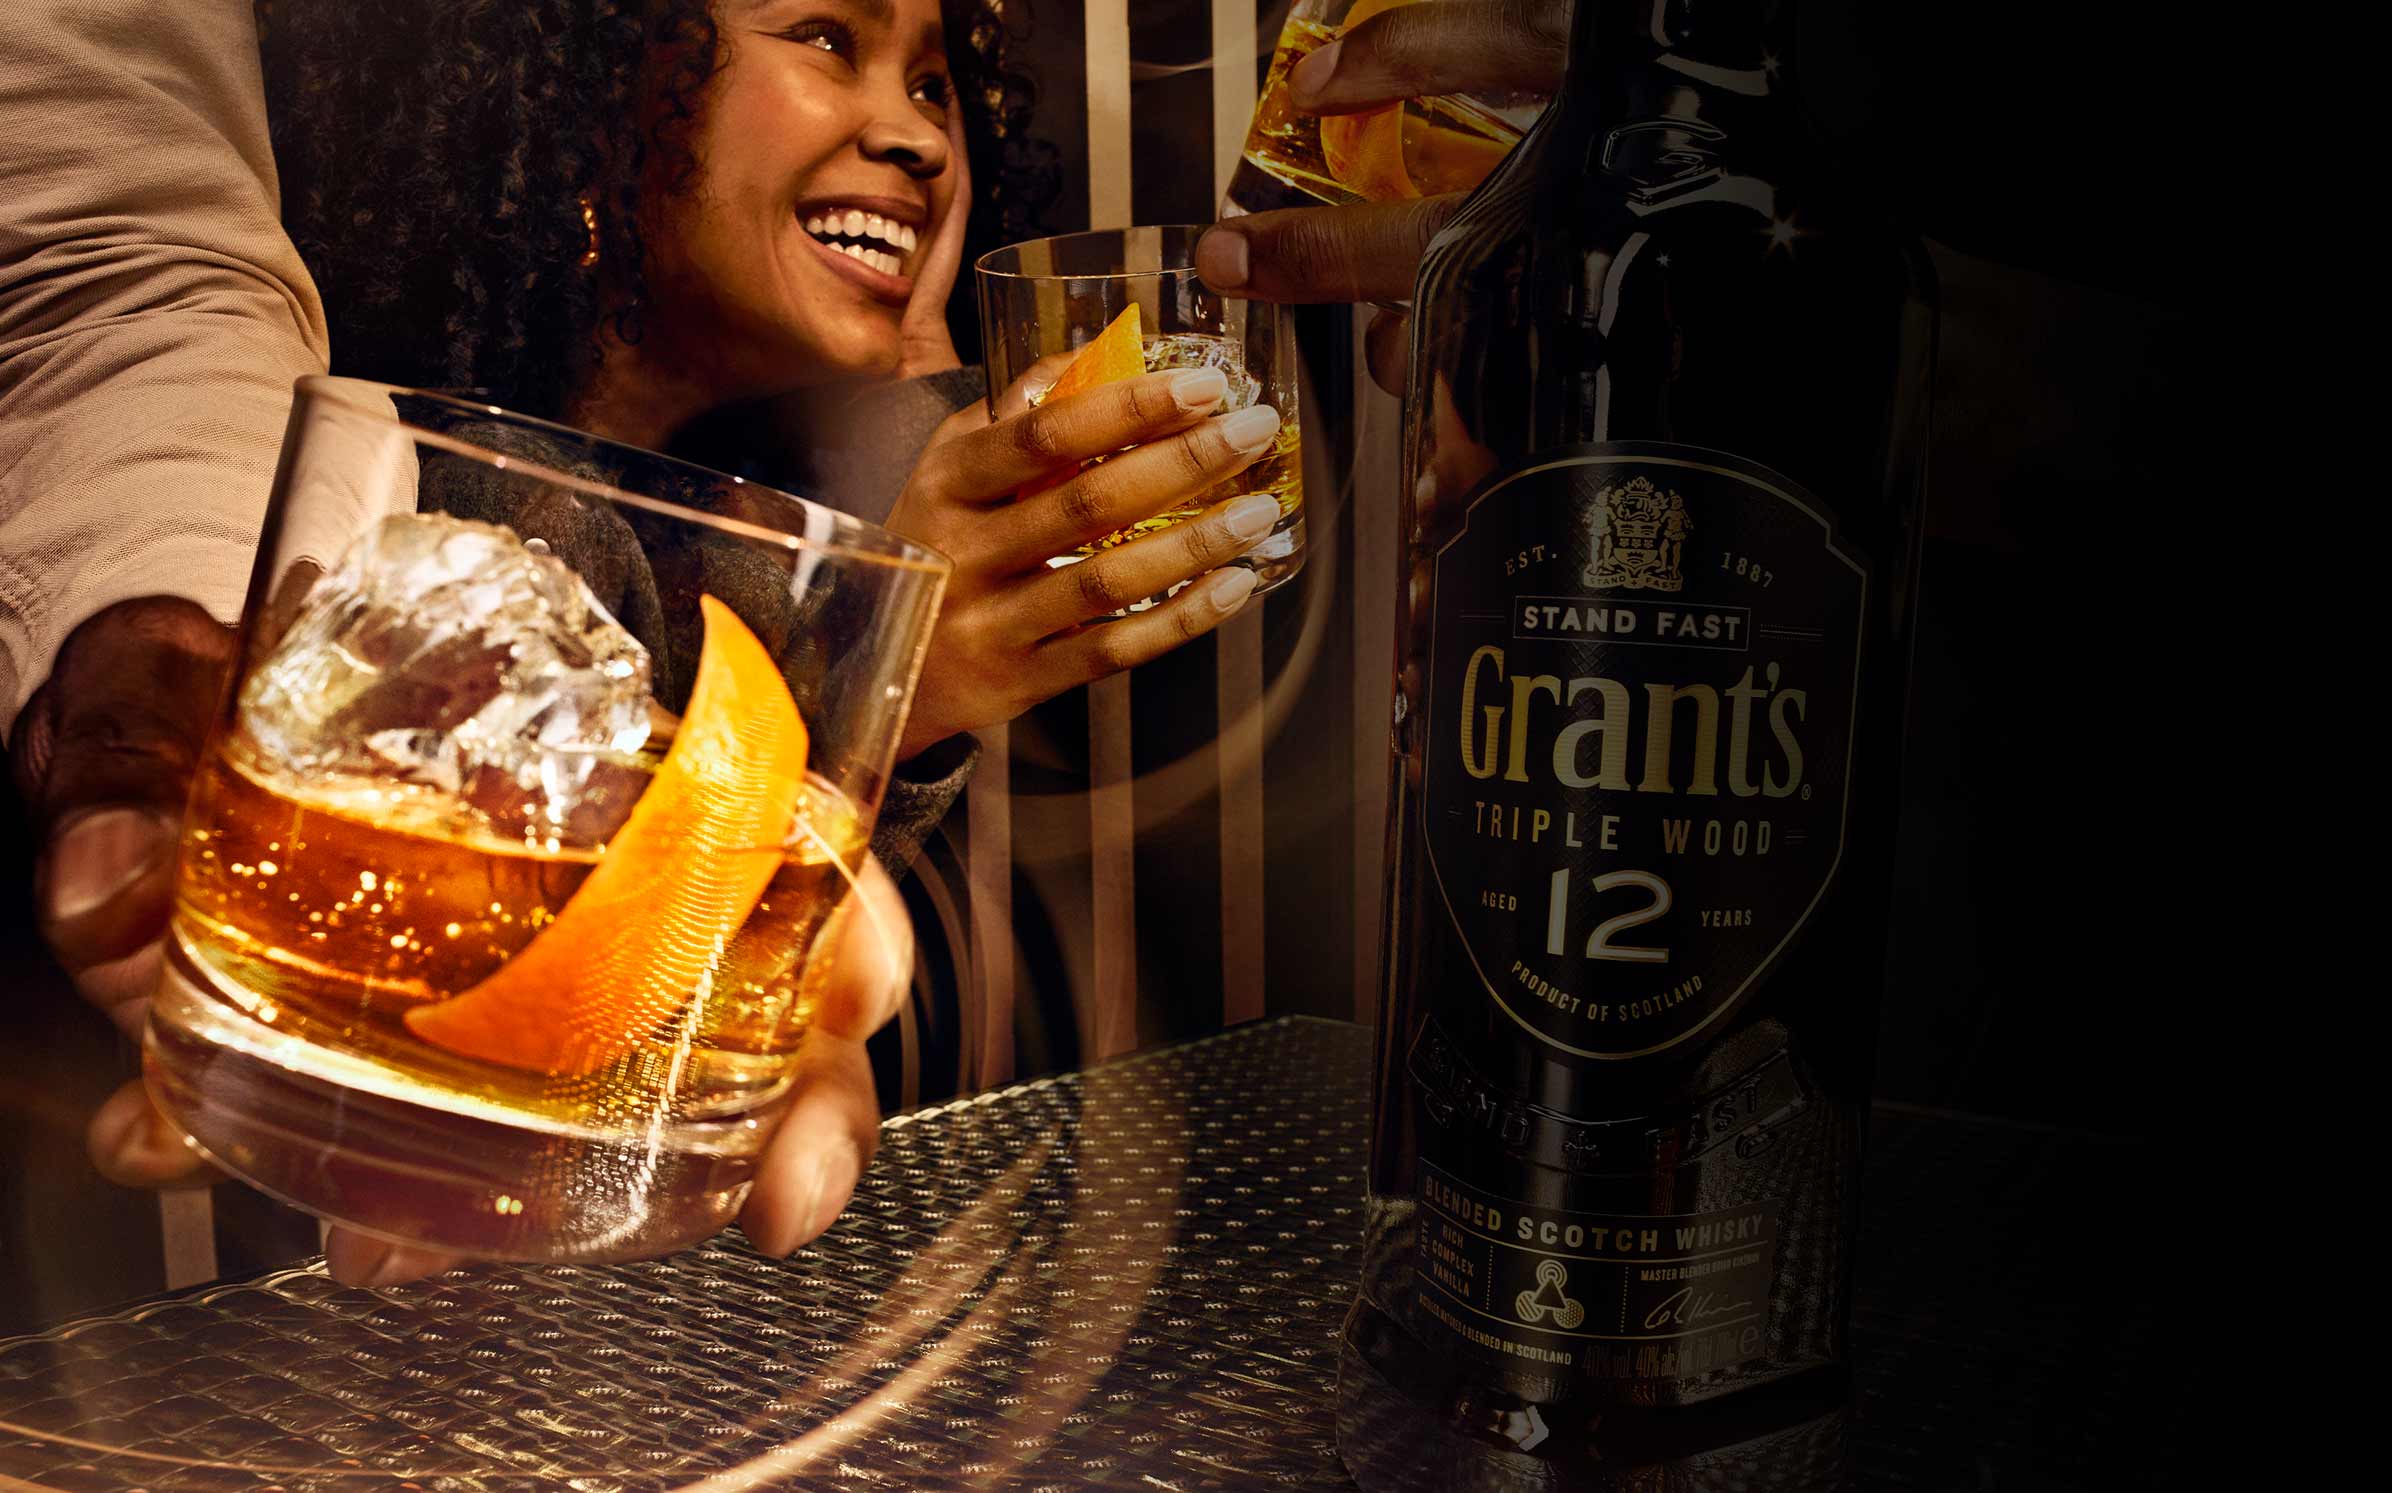 Grant's Triple Wood 12 Blended Scotch Whisky | Grant's Whisky